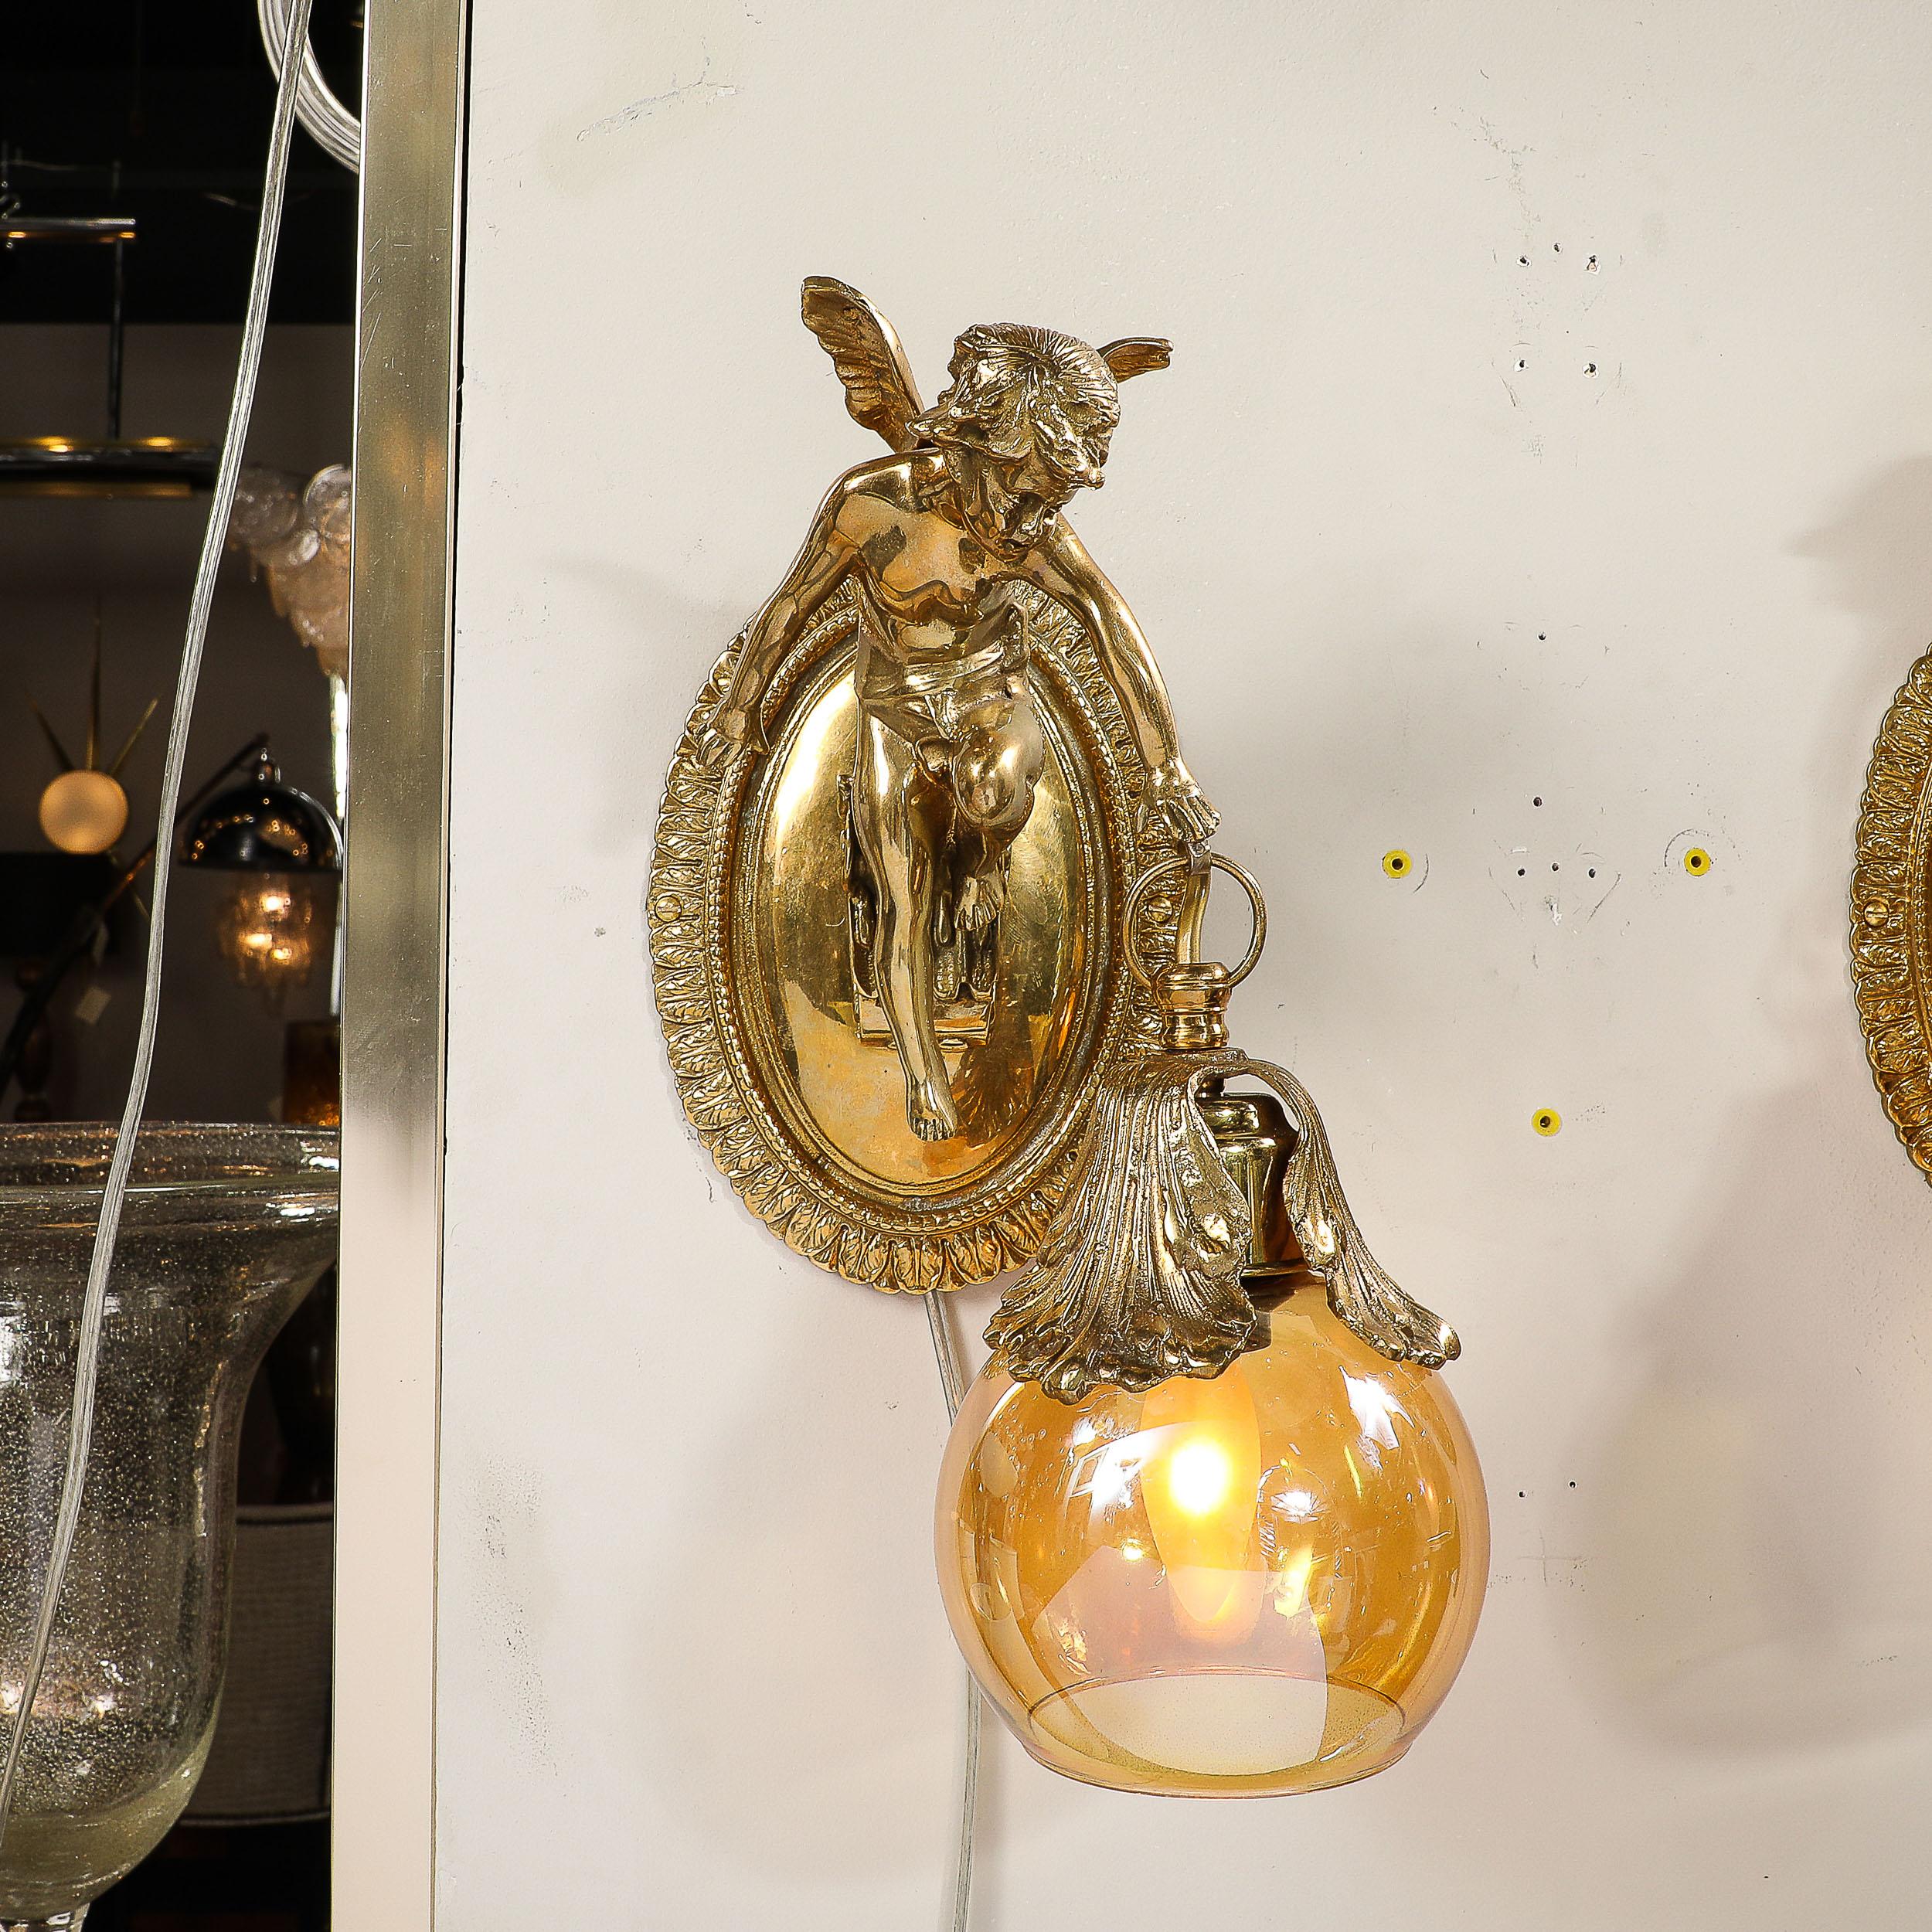 This exquisite Pair of Neoclassical Cherub Sconces in antique Brass W/Smoke Amber Shades originates from the Czech Republic during the latter half of the 20th Century. Featuring a lovely neoclassical sculpted figure of Winged Cherubs extending from